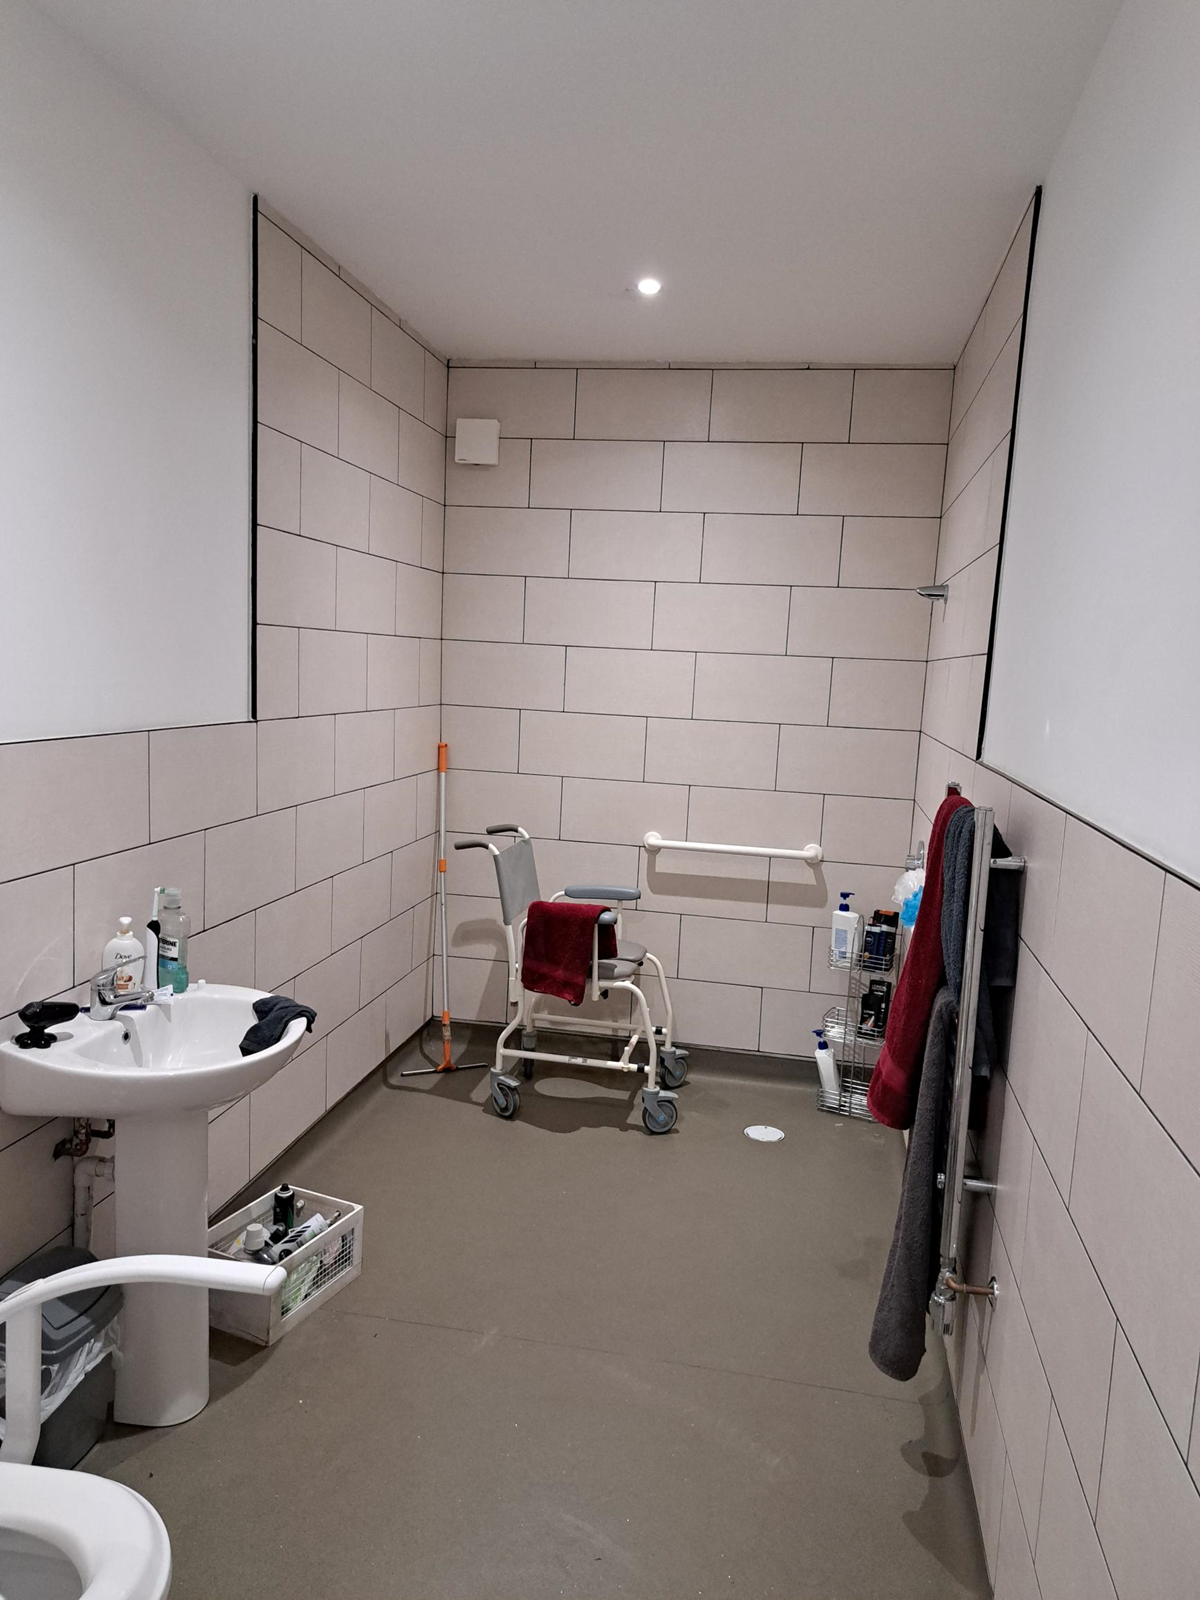 A bathroom at the Slyne Road supported living apartments